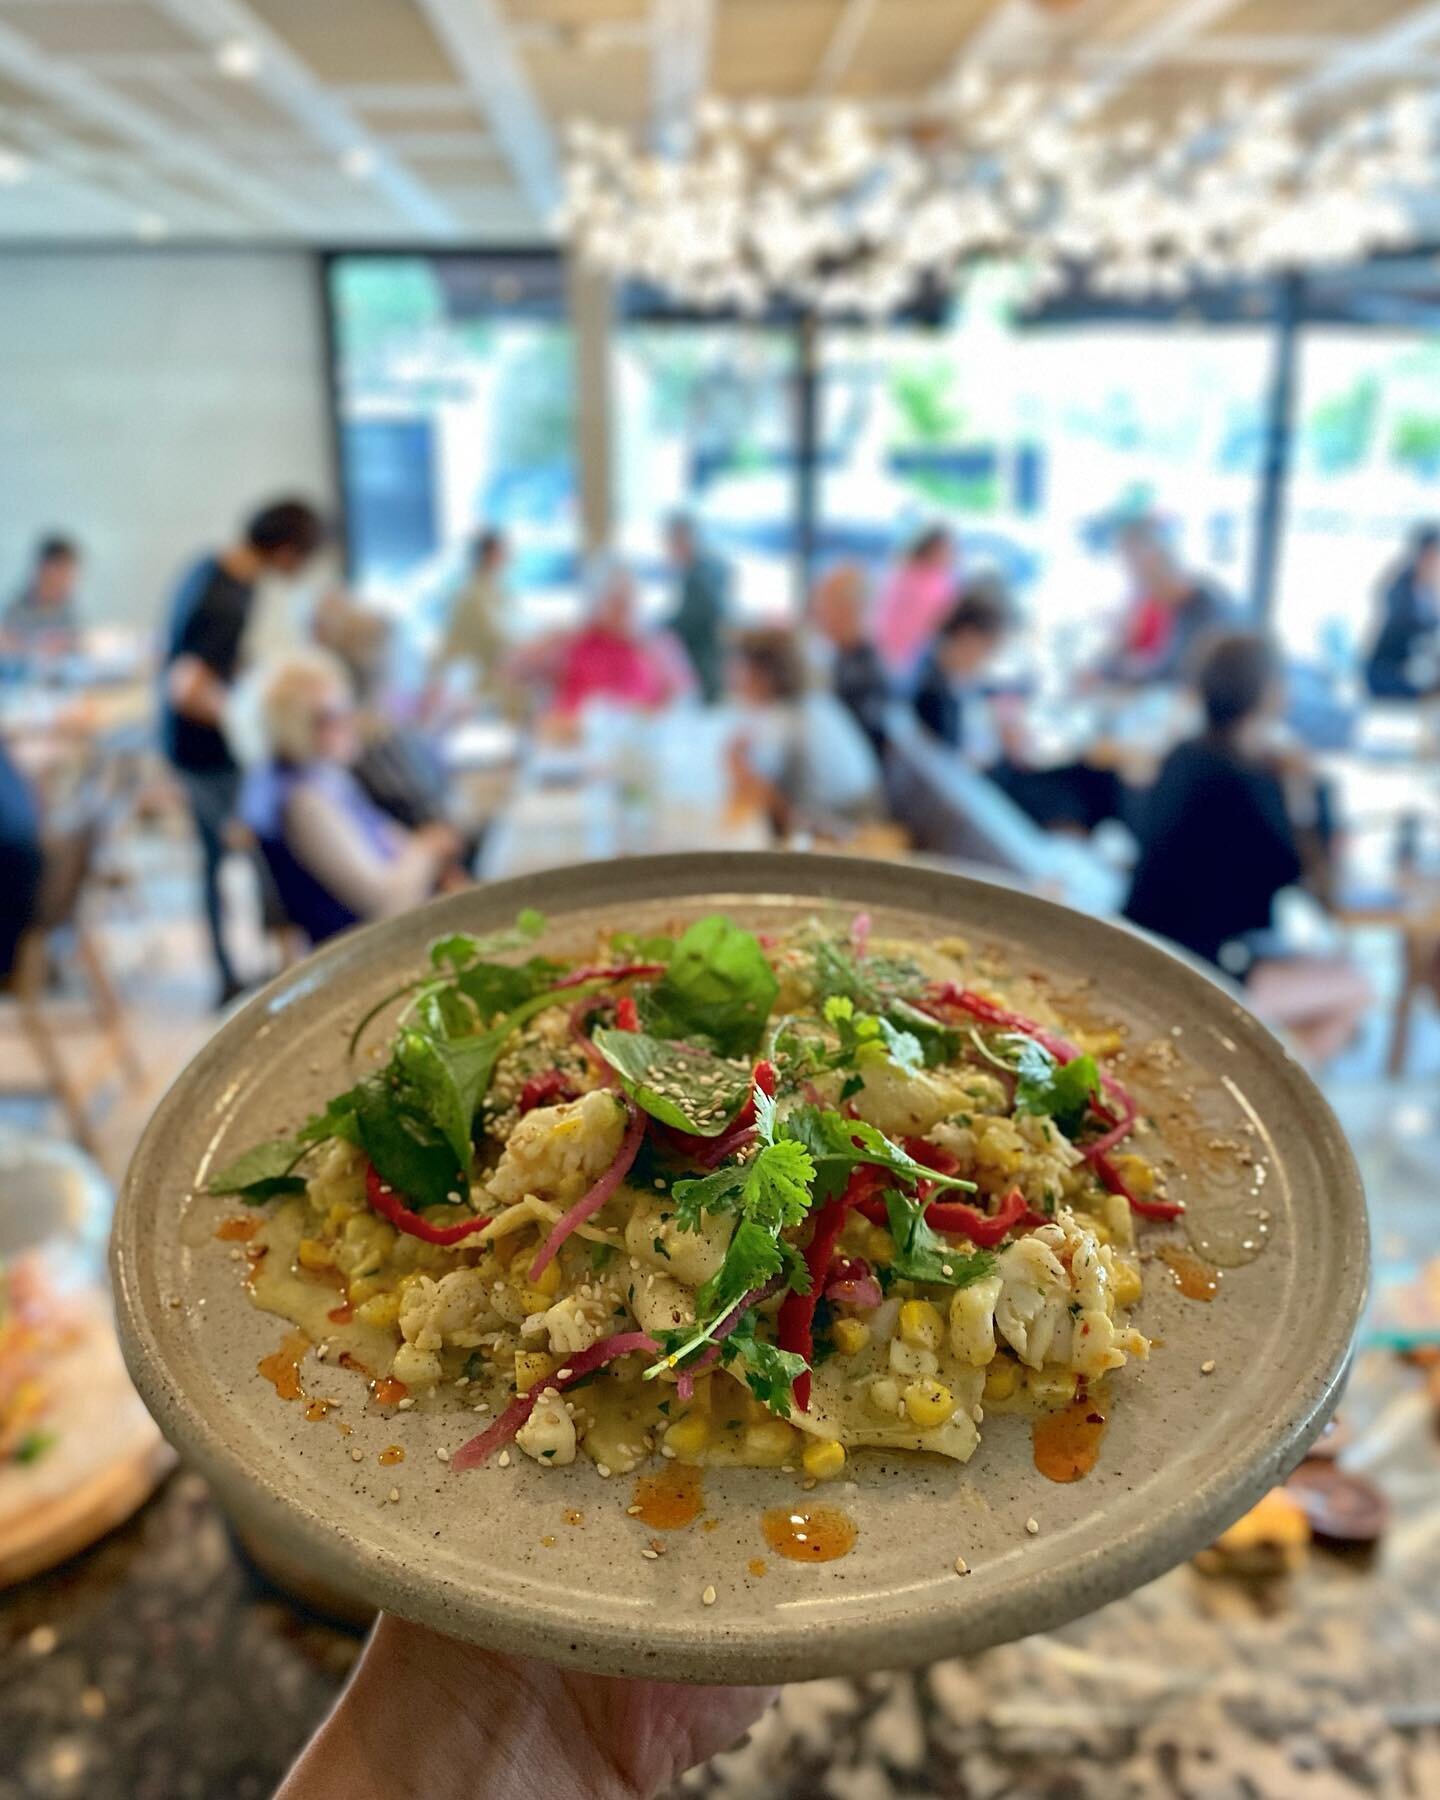 Tonight&rsquo;s special by our head chef @ezraw17 handkerchief pasta with crayfish and sweet corn 🤩